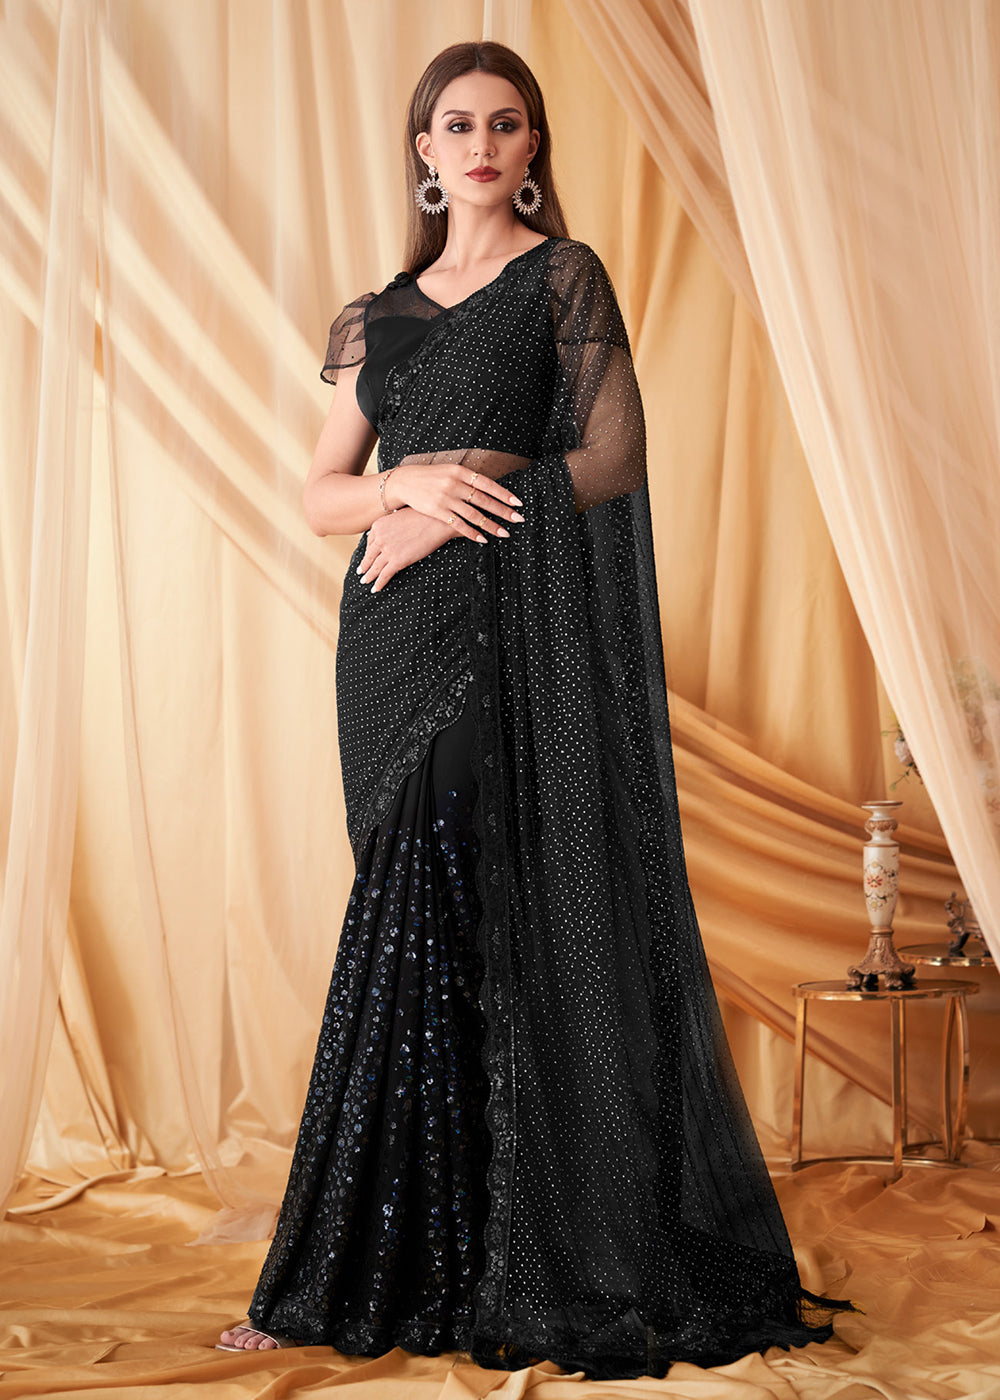 Buy Now Black Net & Georgette Embroidered Festive Party Saree Online in USA, UK, Canada & Worldwide at Empress Clothing. 